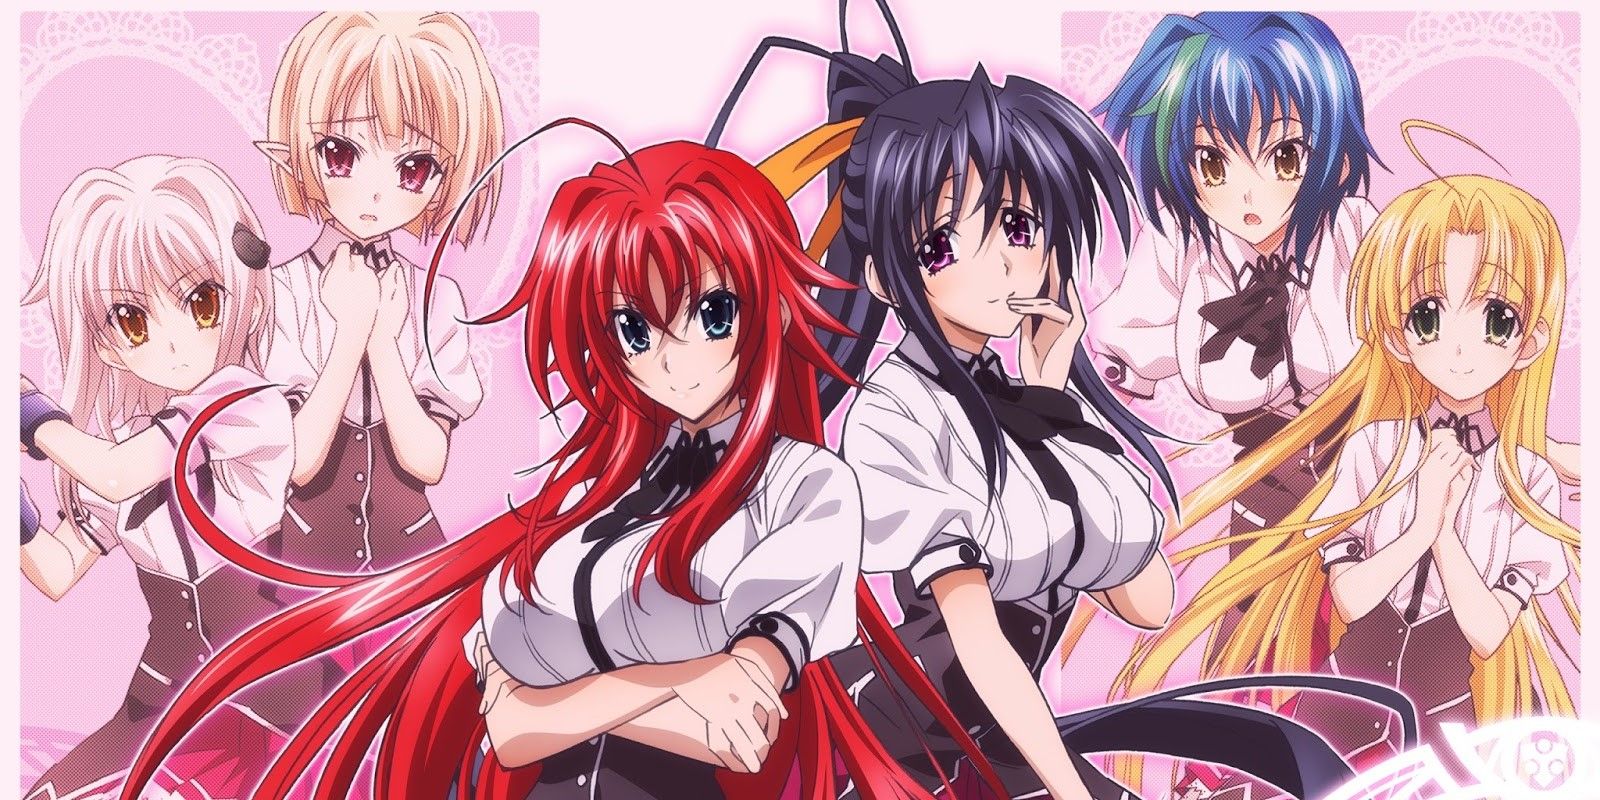 An image from High School DxD.